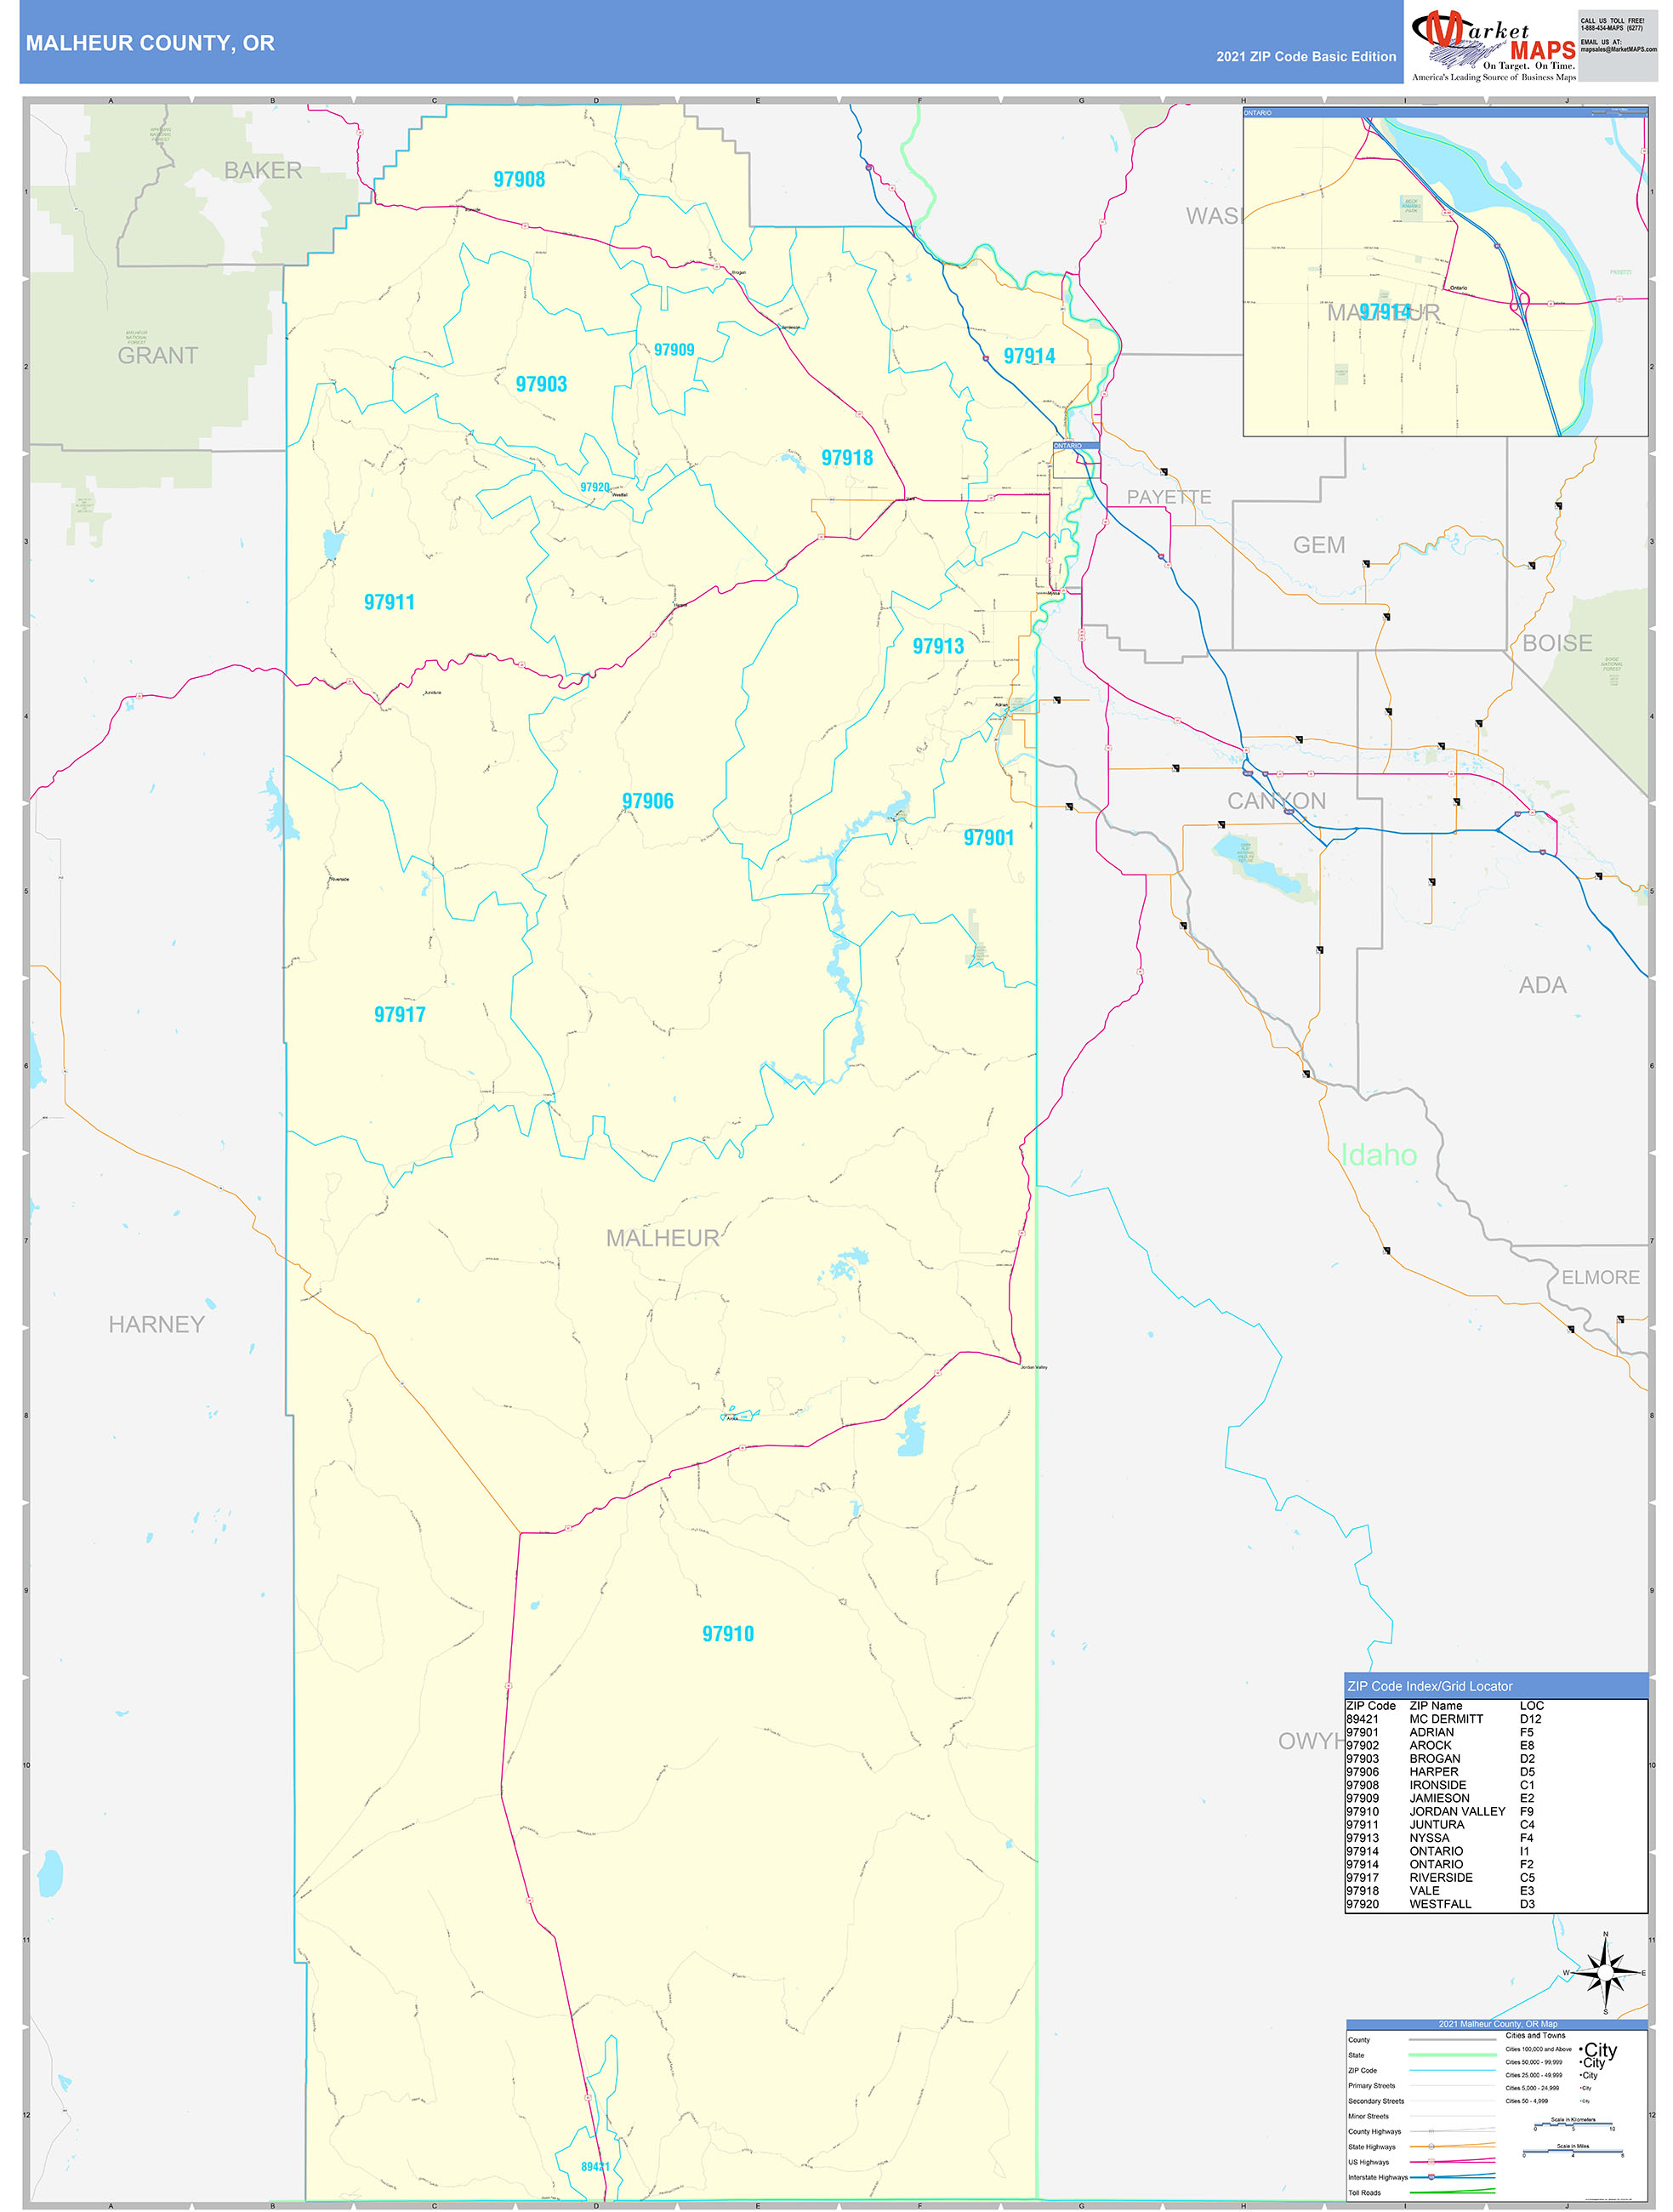 Malheur County OR Zip Code Wall Map Basic Style by MarketMAPS MapSales